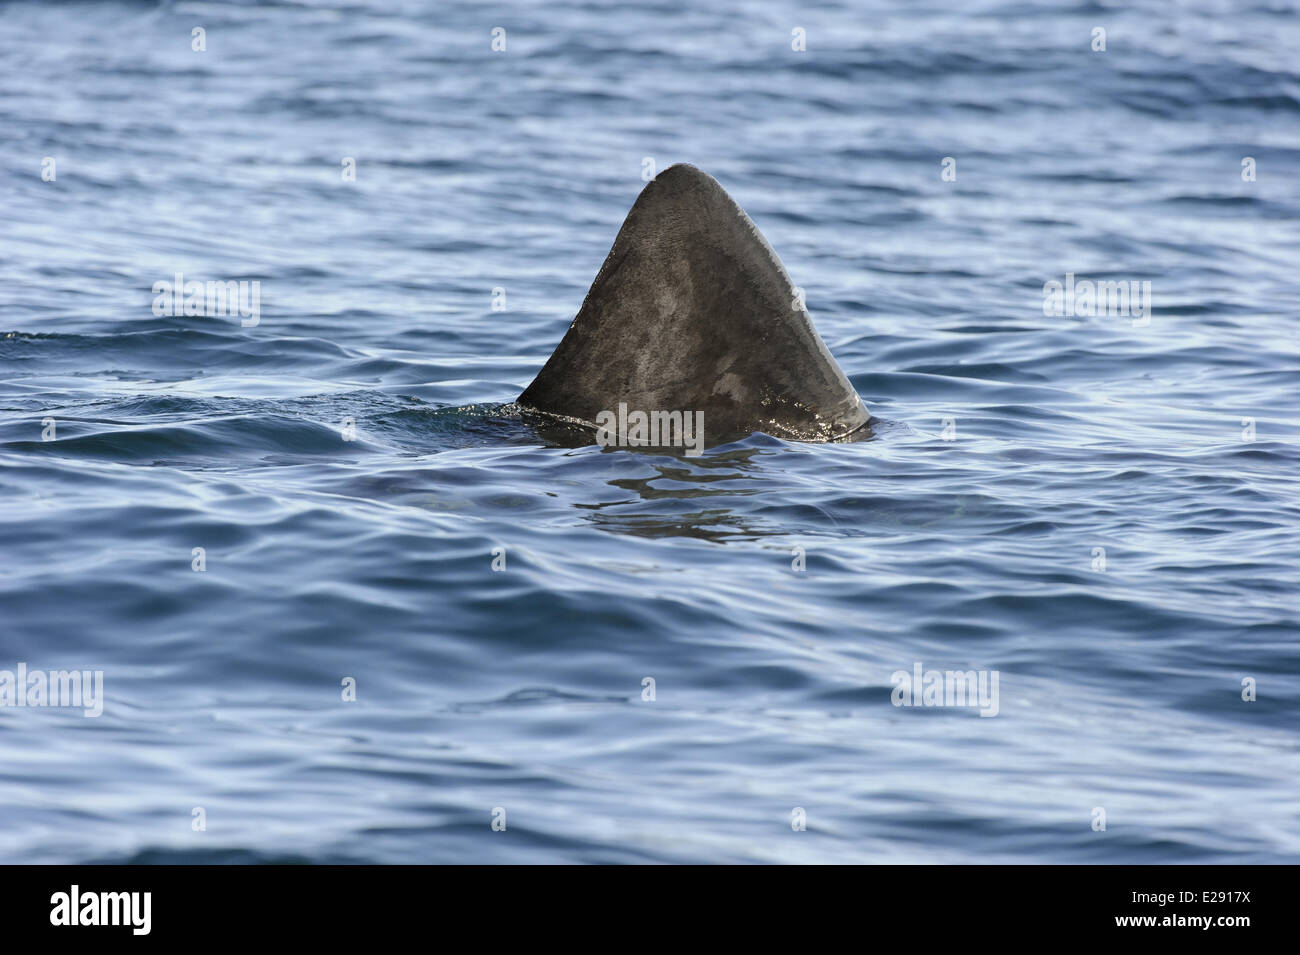 Basking Shark (Cetorhinus maximus) adult, dorsal fin at surface of water, St. Kilda, Outer Hebrides, Scotland, July Stock Photo